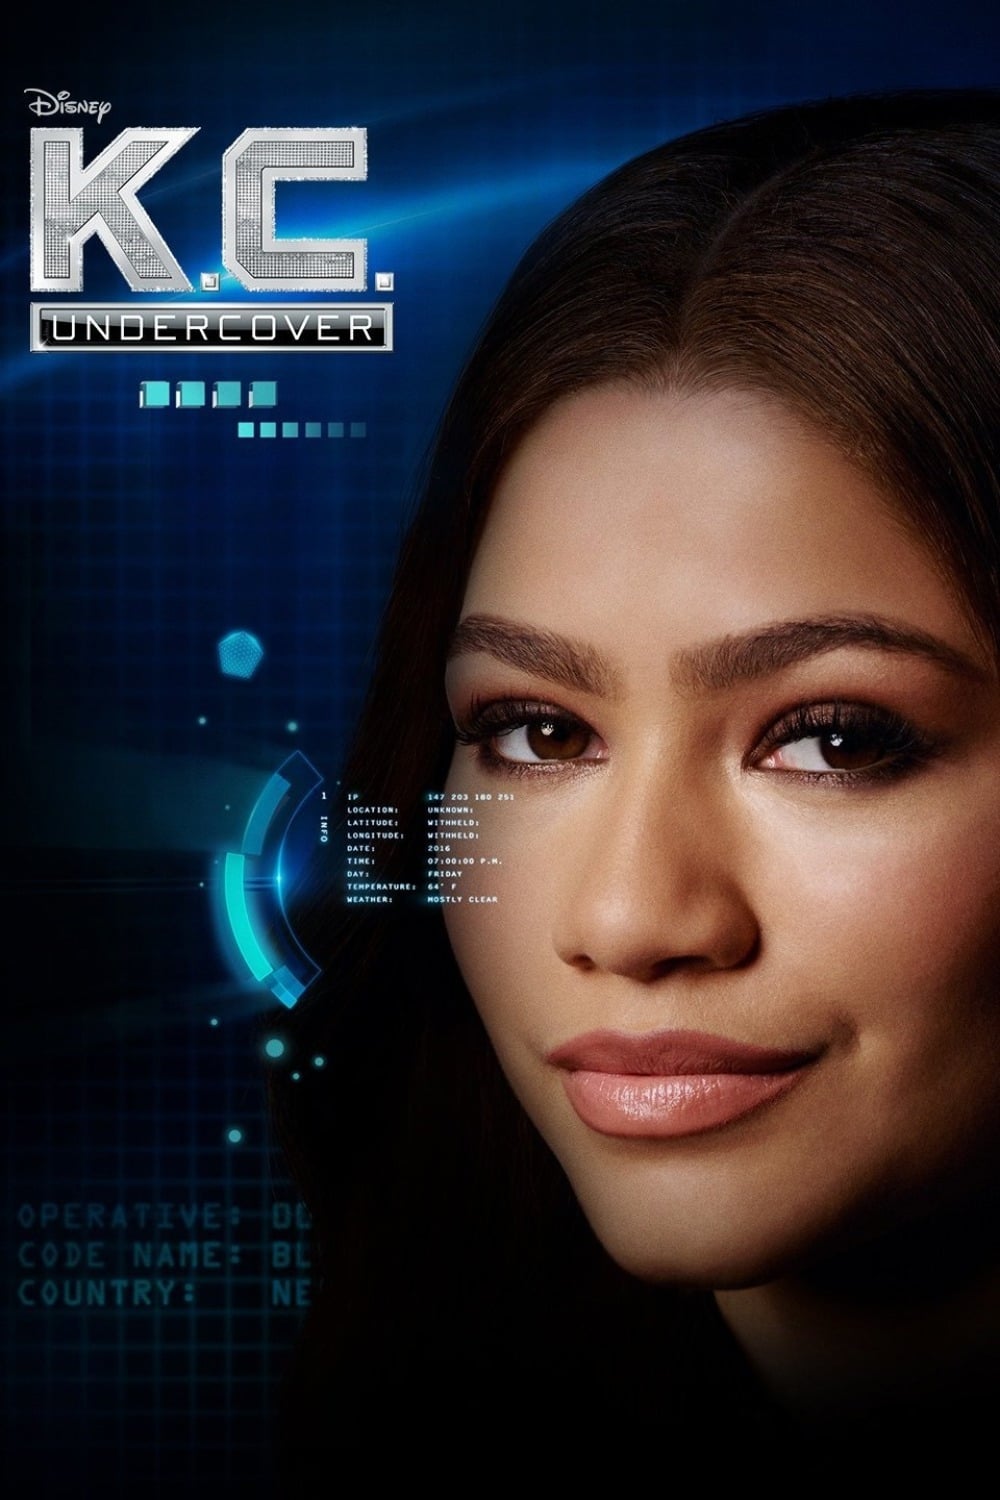 K.C. Undercover TV Shows About Smart